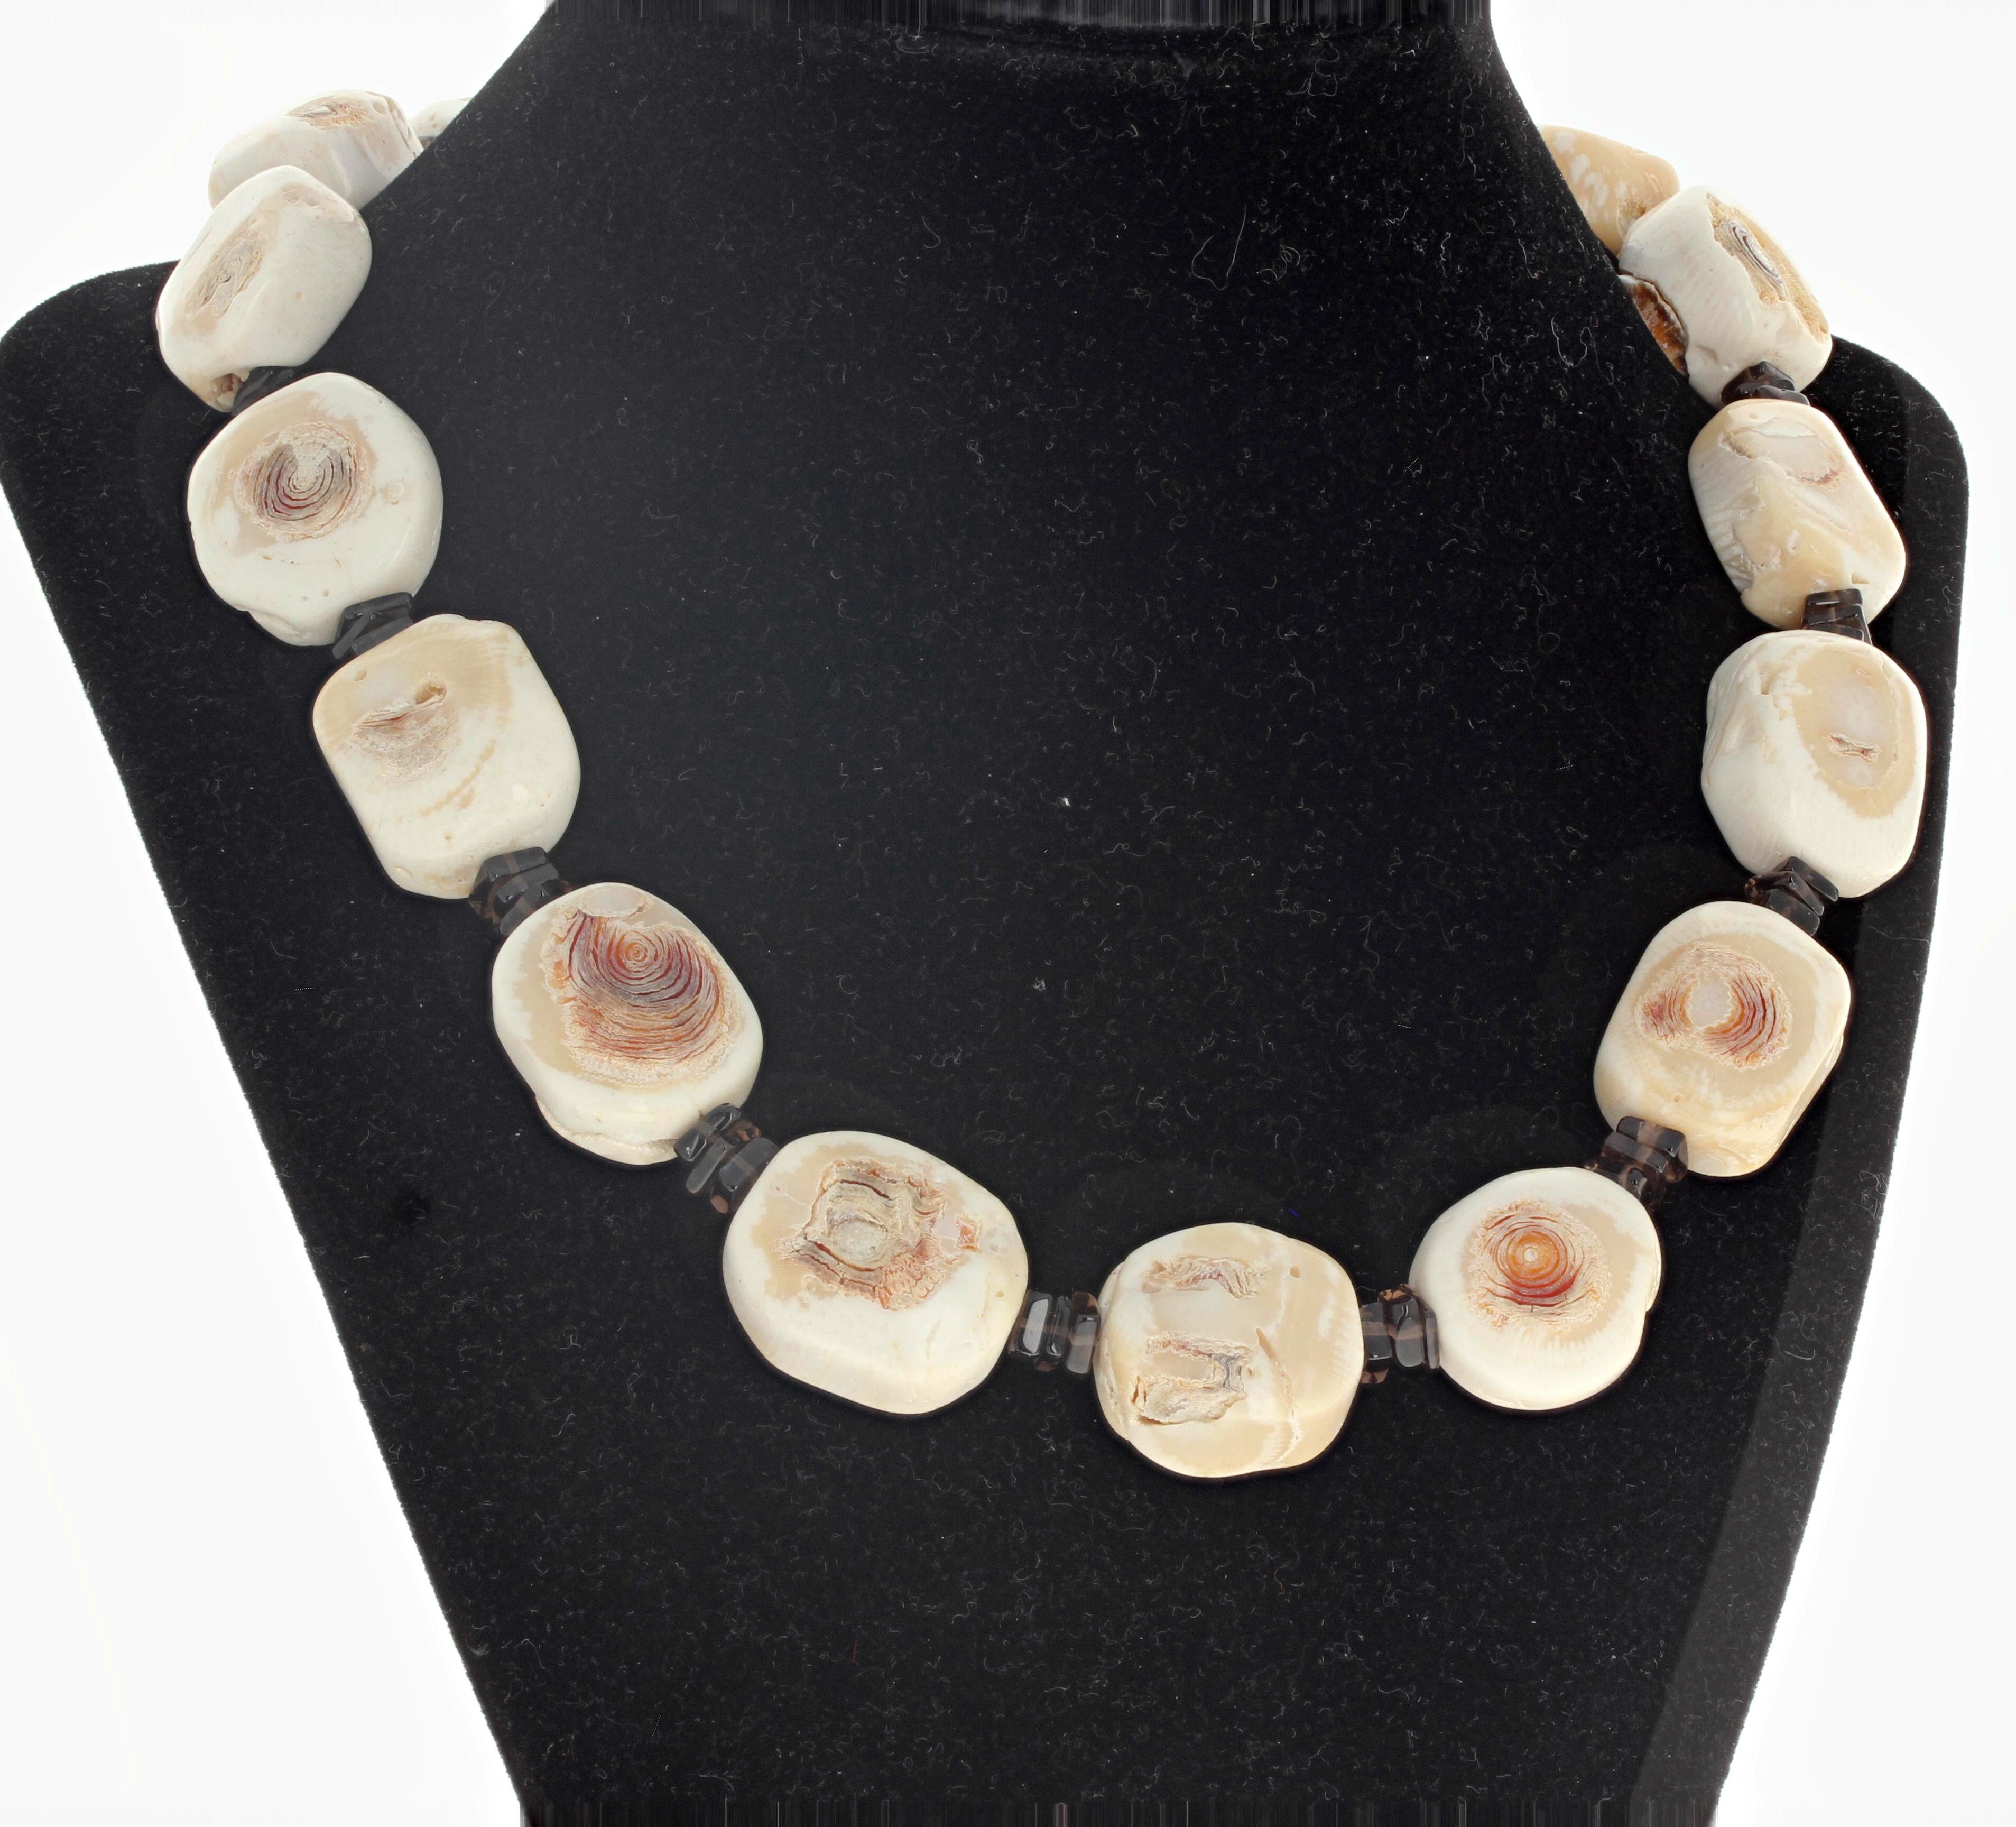 This creamy white natural Bamboo Coral Necklace is 18 inches long.  It is highly polished and is enhanced by glistening rondels of natural Smoky Quartz gemstones.  This lovely casual elegant necklace has a gold plated easy to use slide-in clasp. 